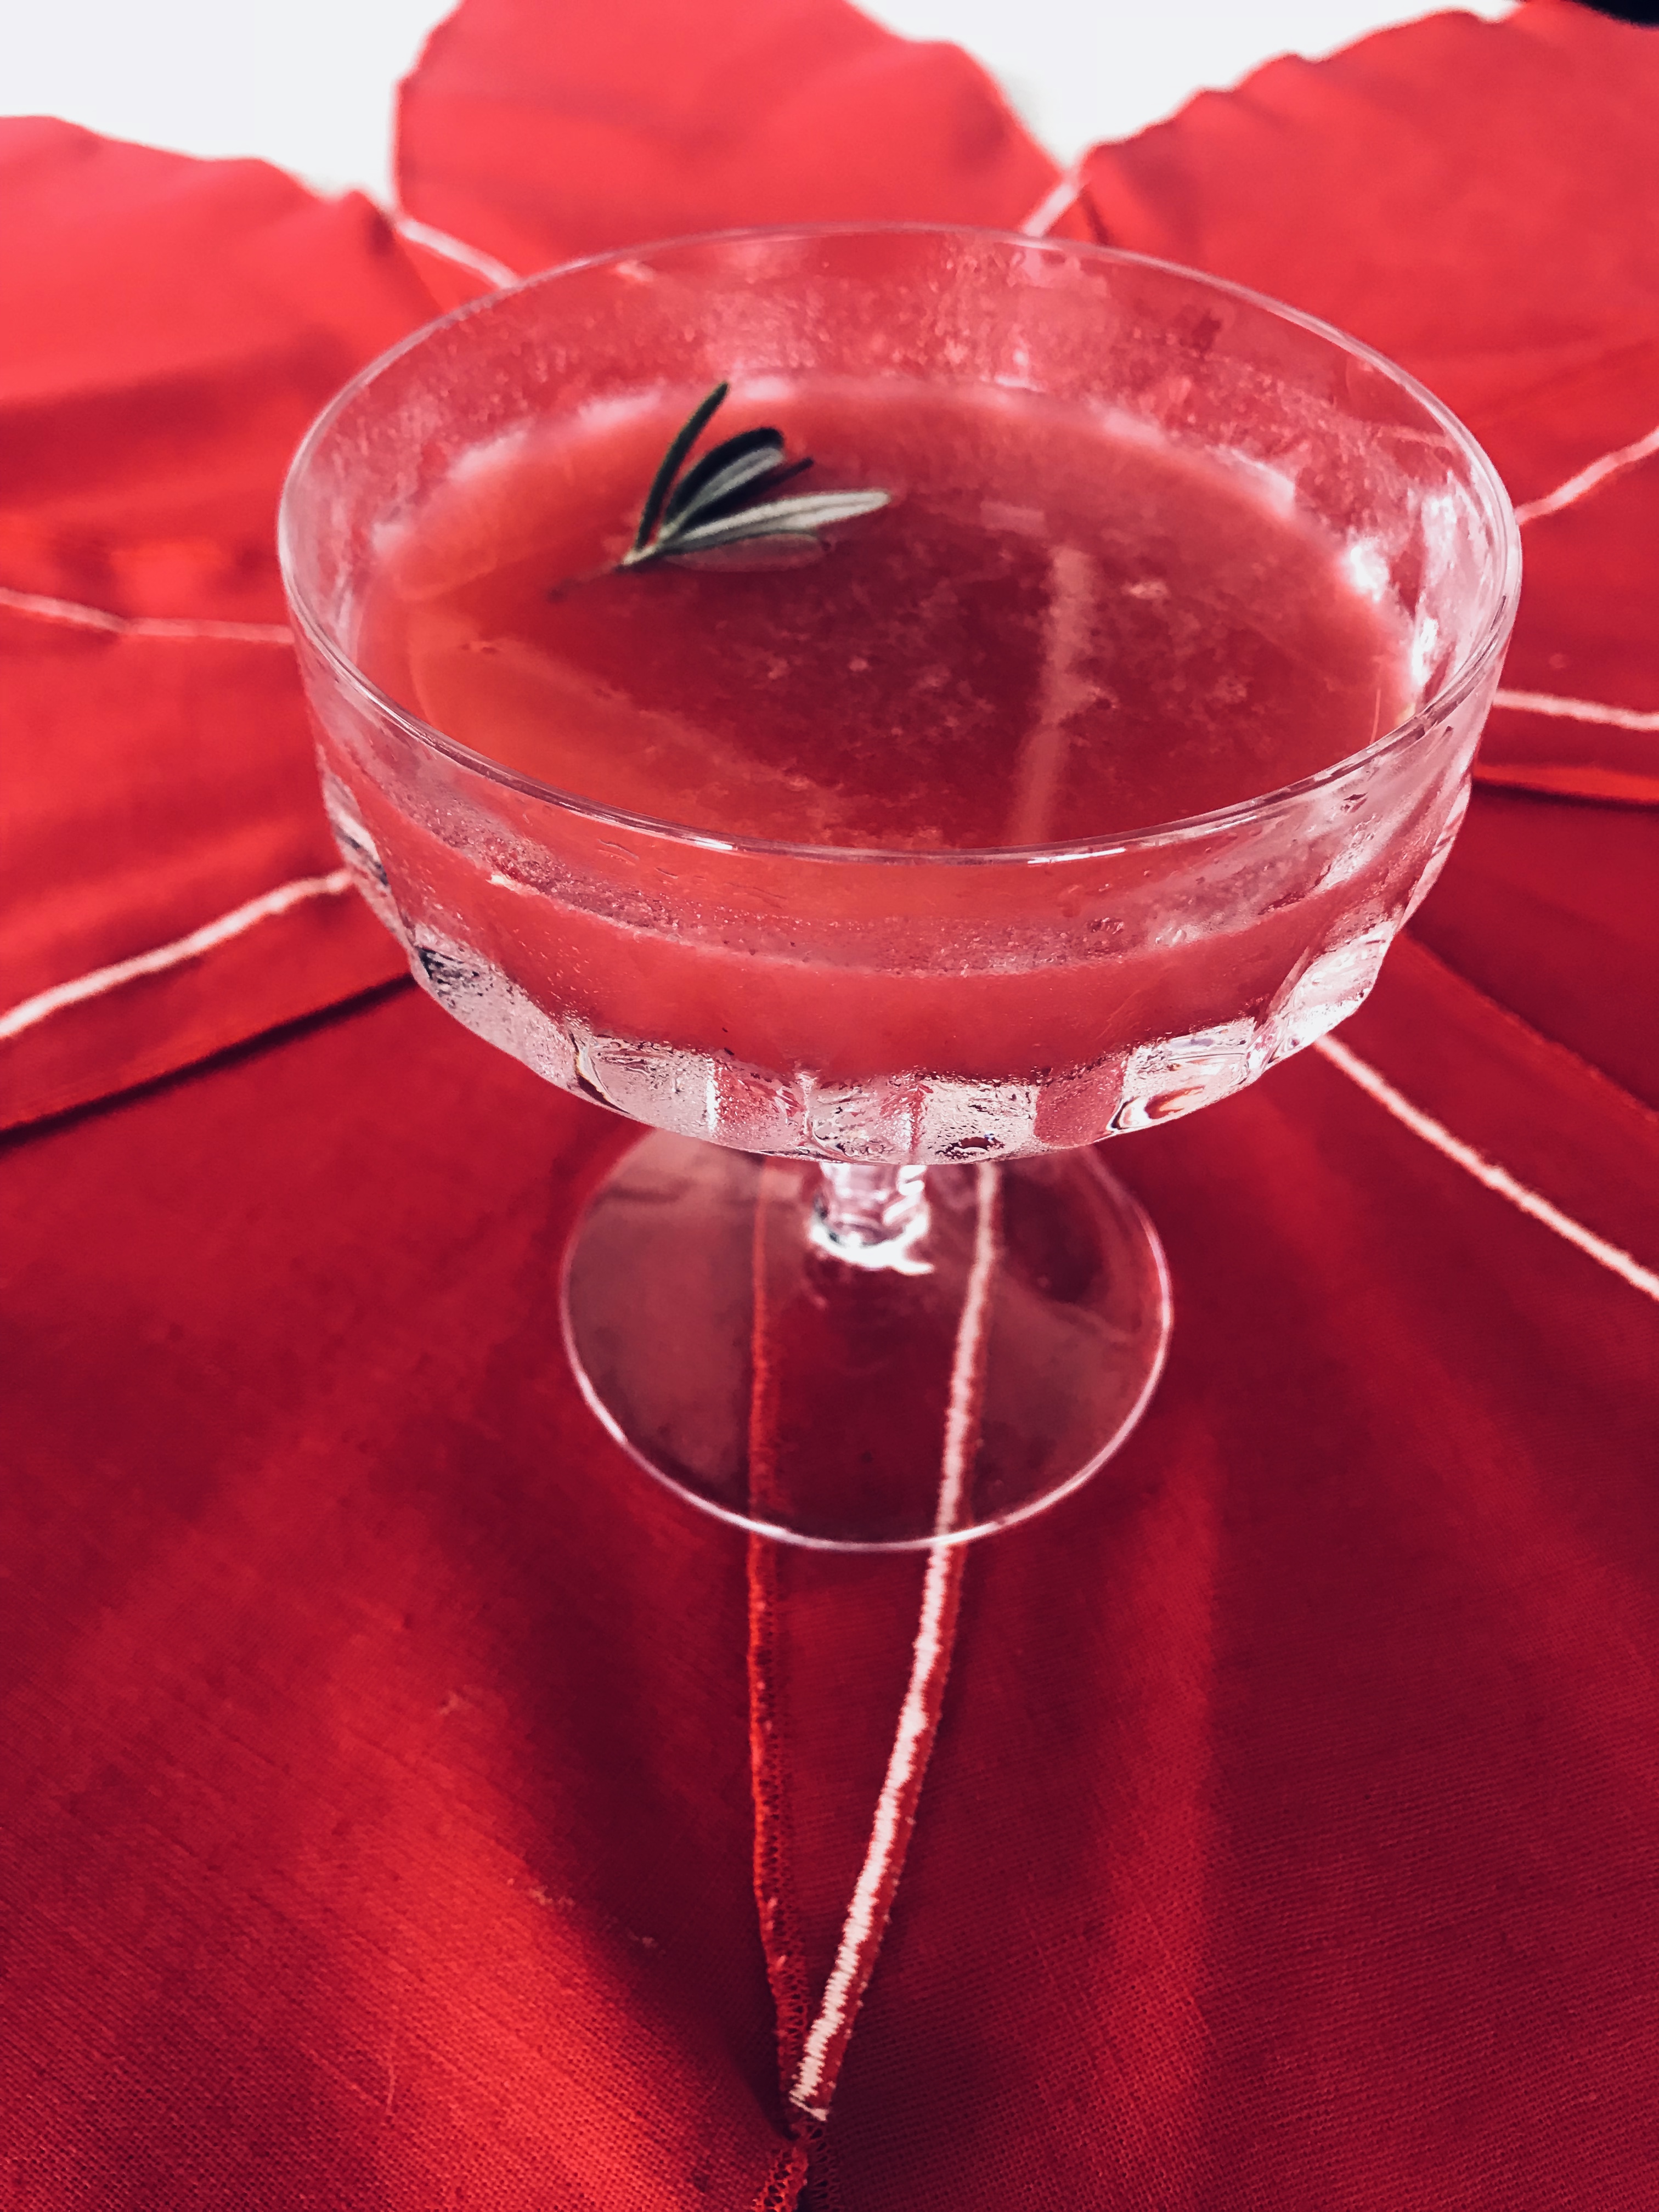 Georgette Moger photographed her New Year Cranberry Cosmonaut cocktail